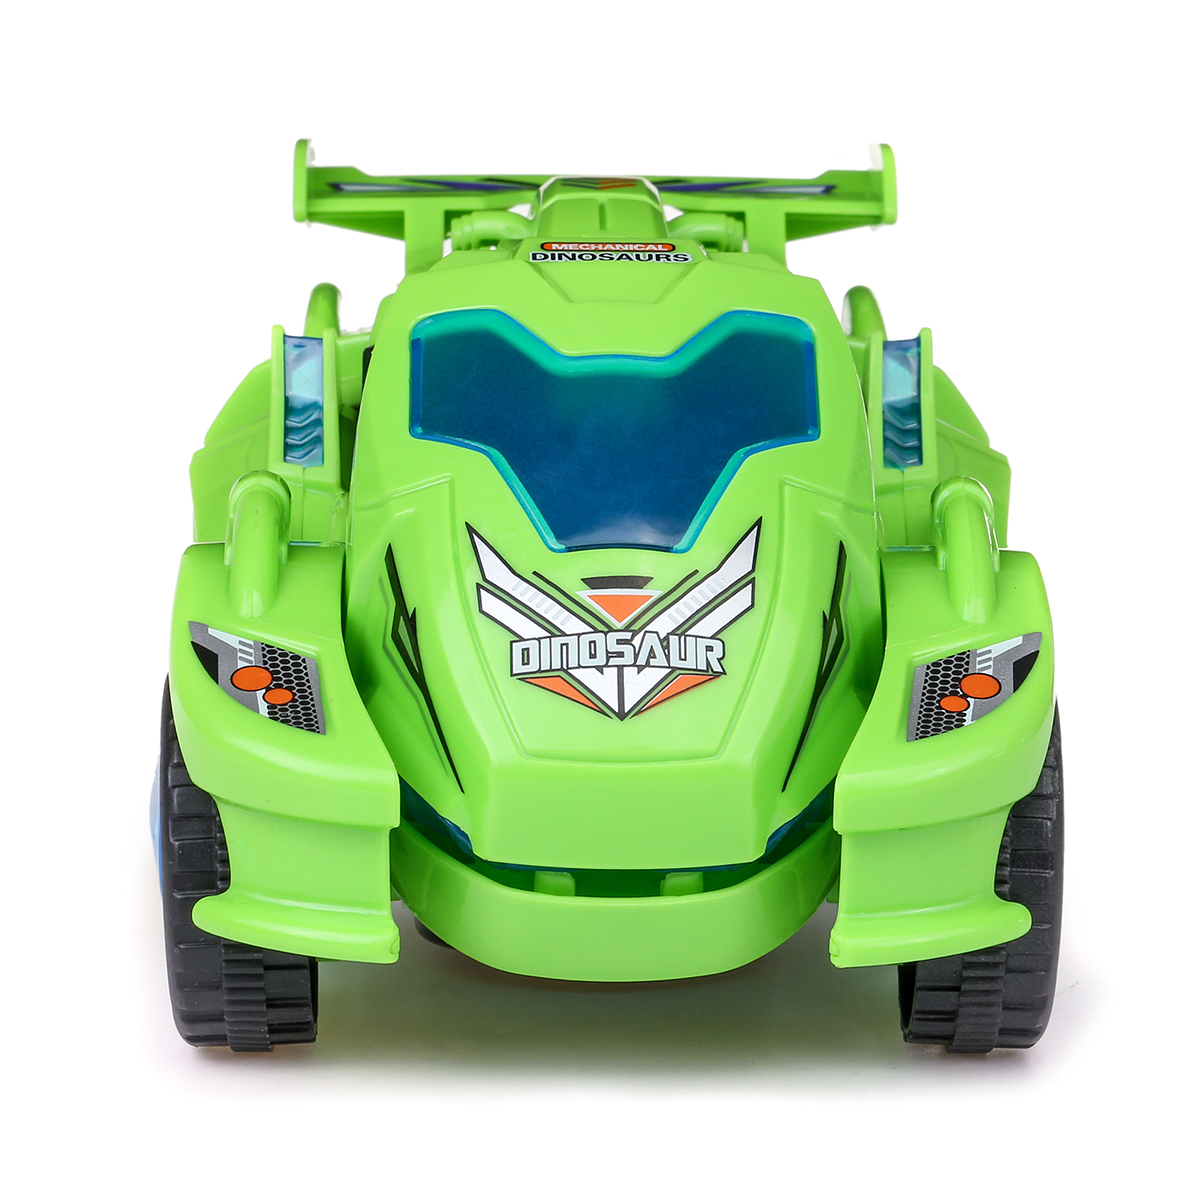 Creative-Dinosaur-Deformation-Toy-Car-Puzzle-Dinosaur-Electric-Toy-Car-Light-and-Music-Electric-Defo-1757309-13